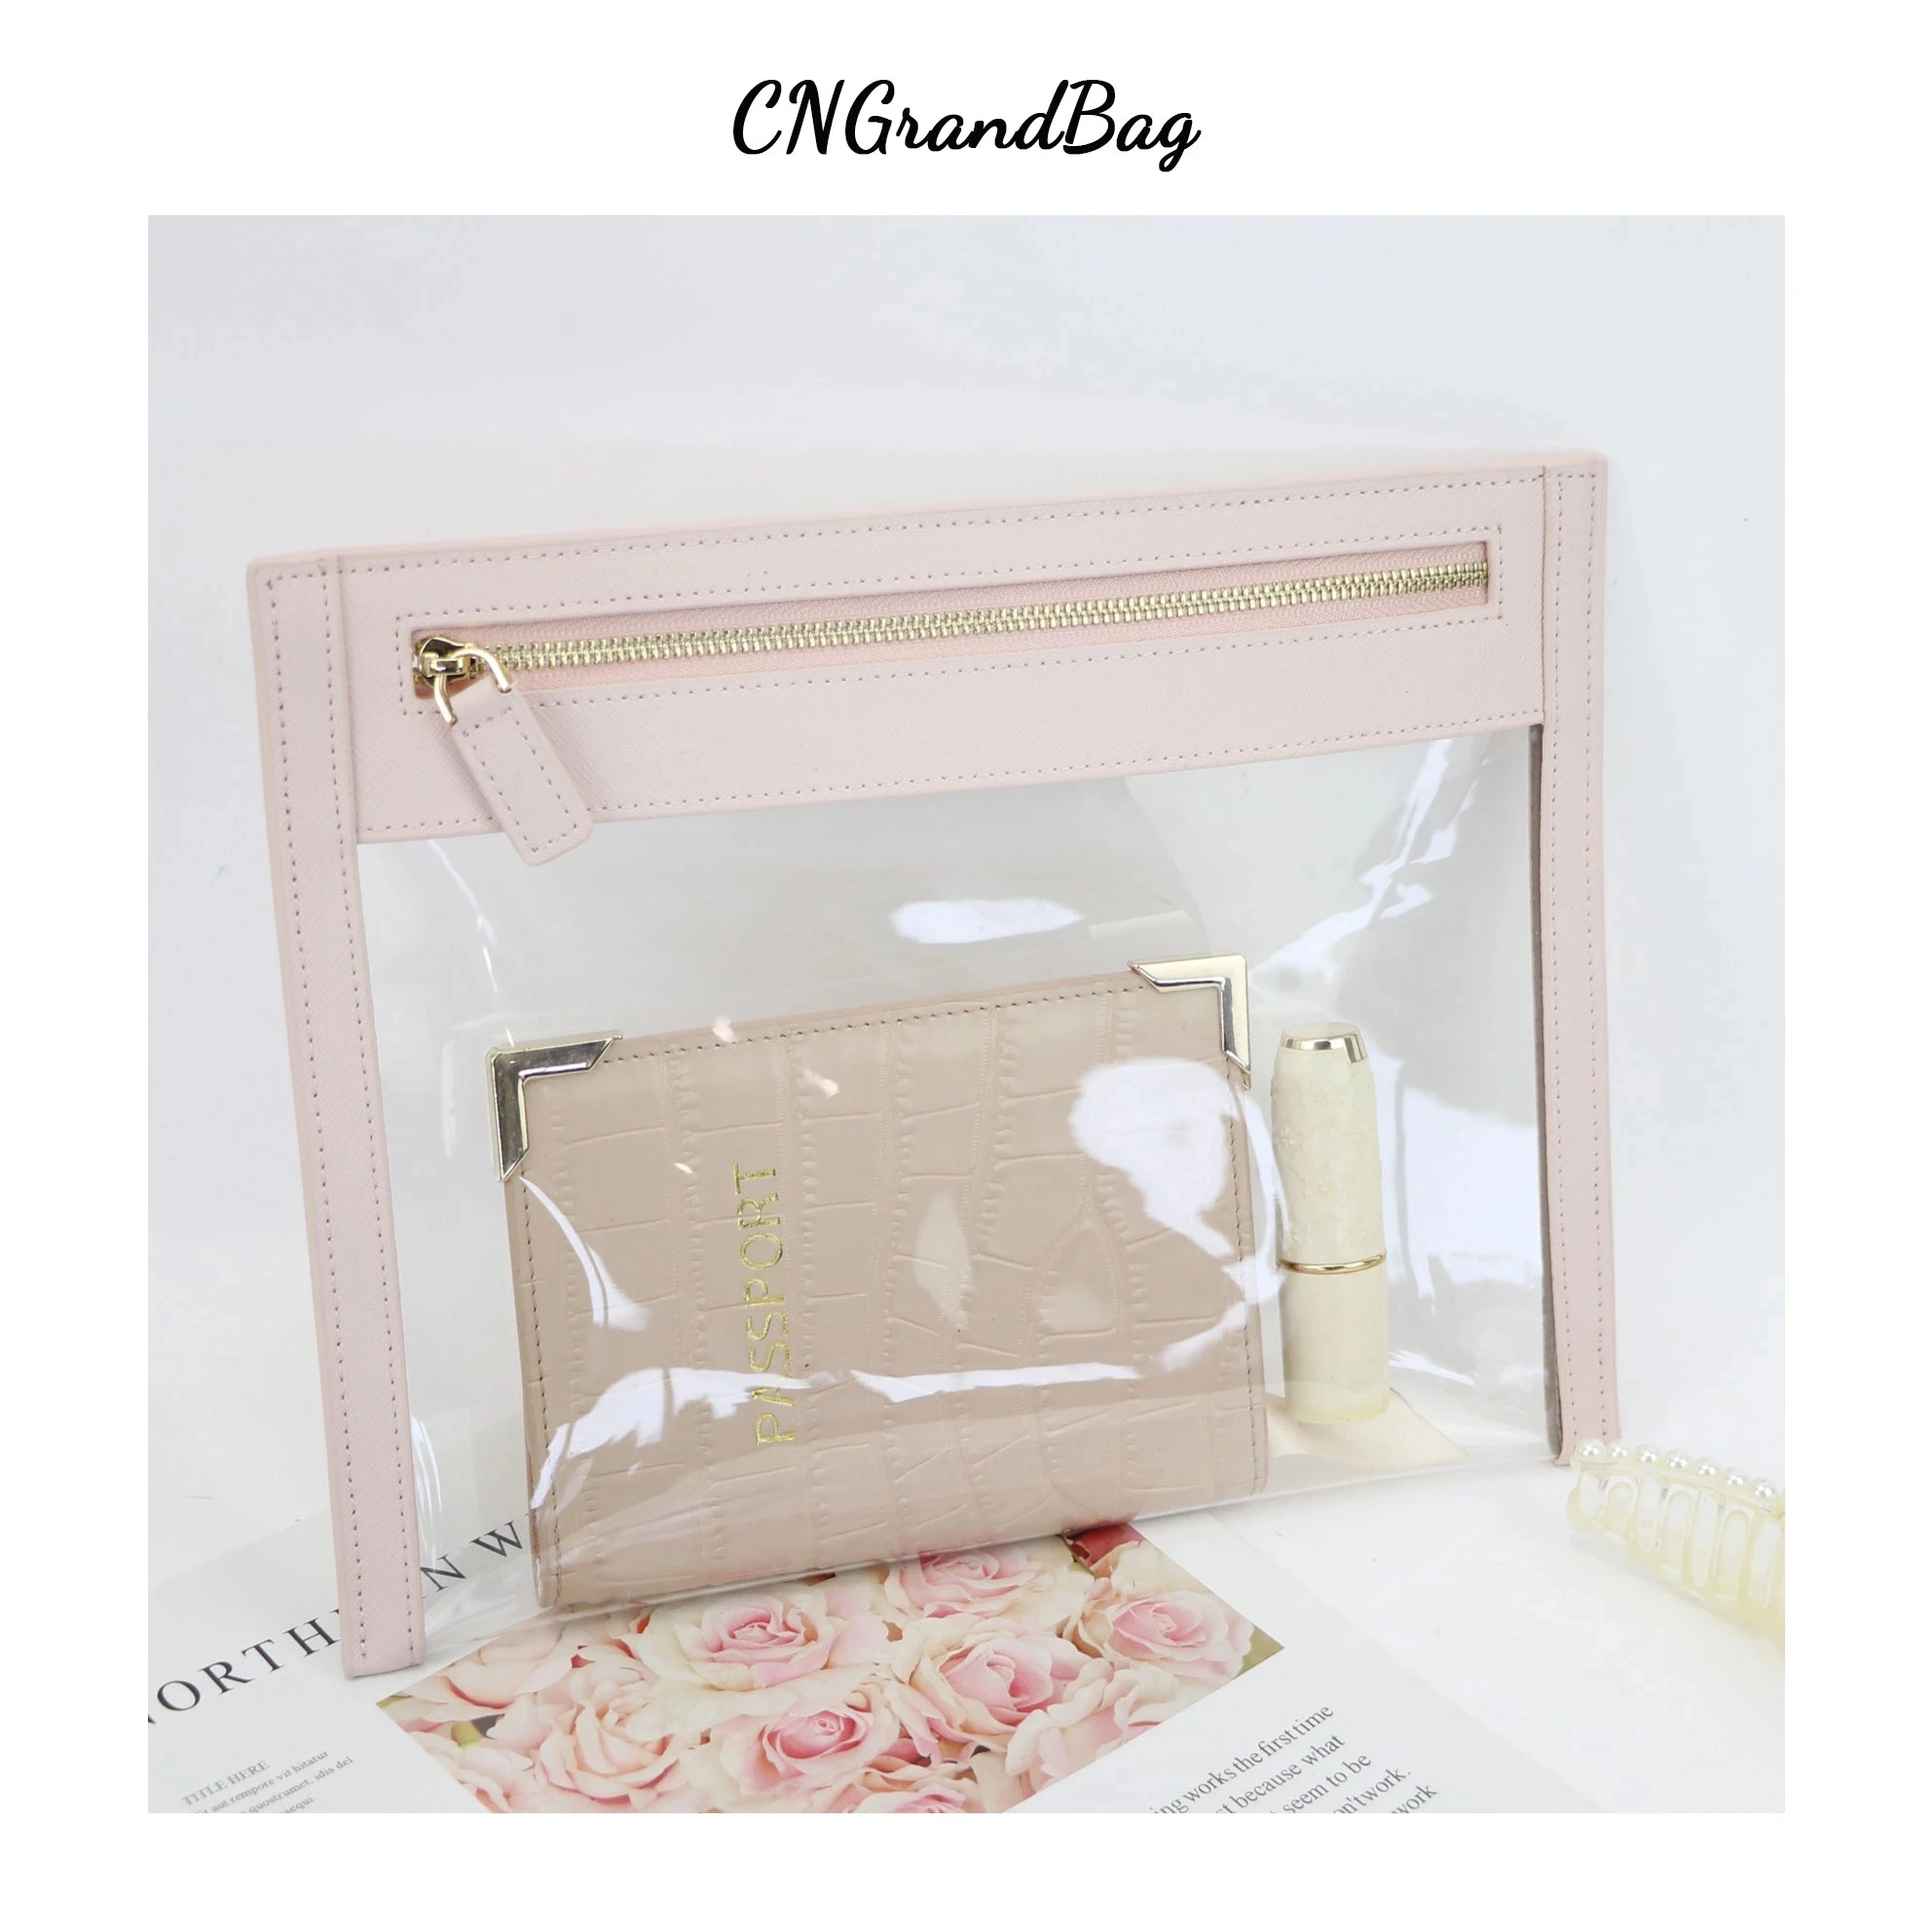 Cusstomized Letters Colorful Saffiano Leather Clear PVC Cosmetic Bag Ladies TPU Travel Organizer Wash Bag 20 clear plastic hair clips side combs pin barrettes 70x40mm for ladies clear plastic side combs pin barrettes